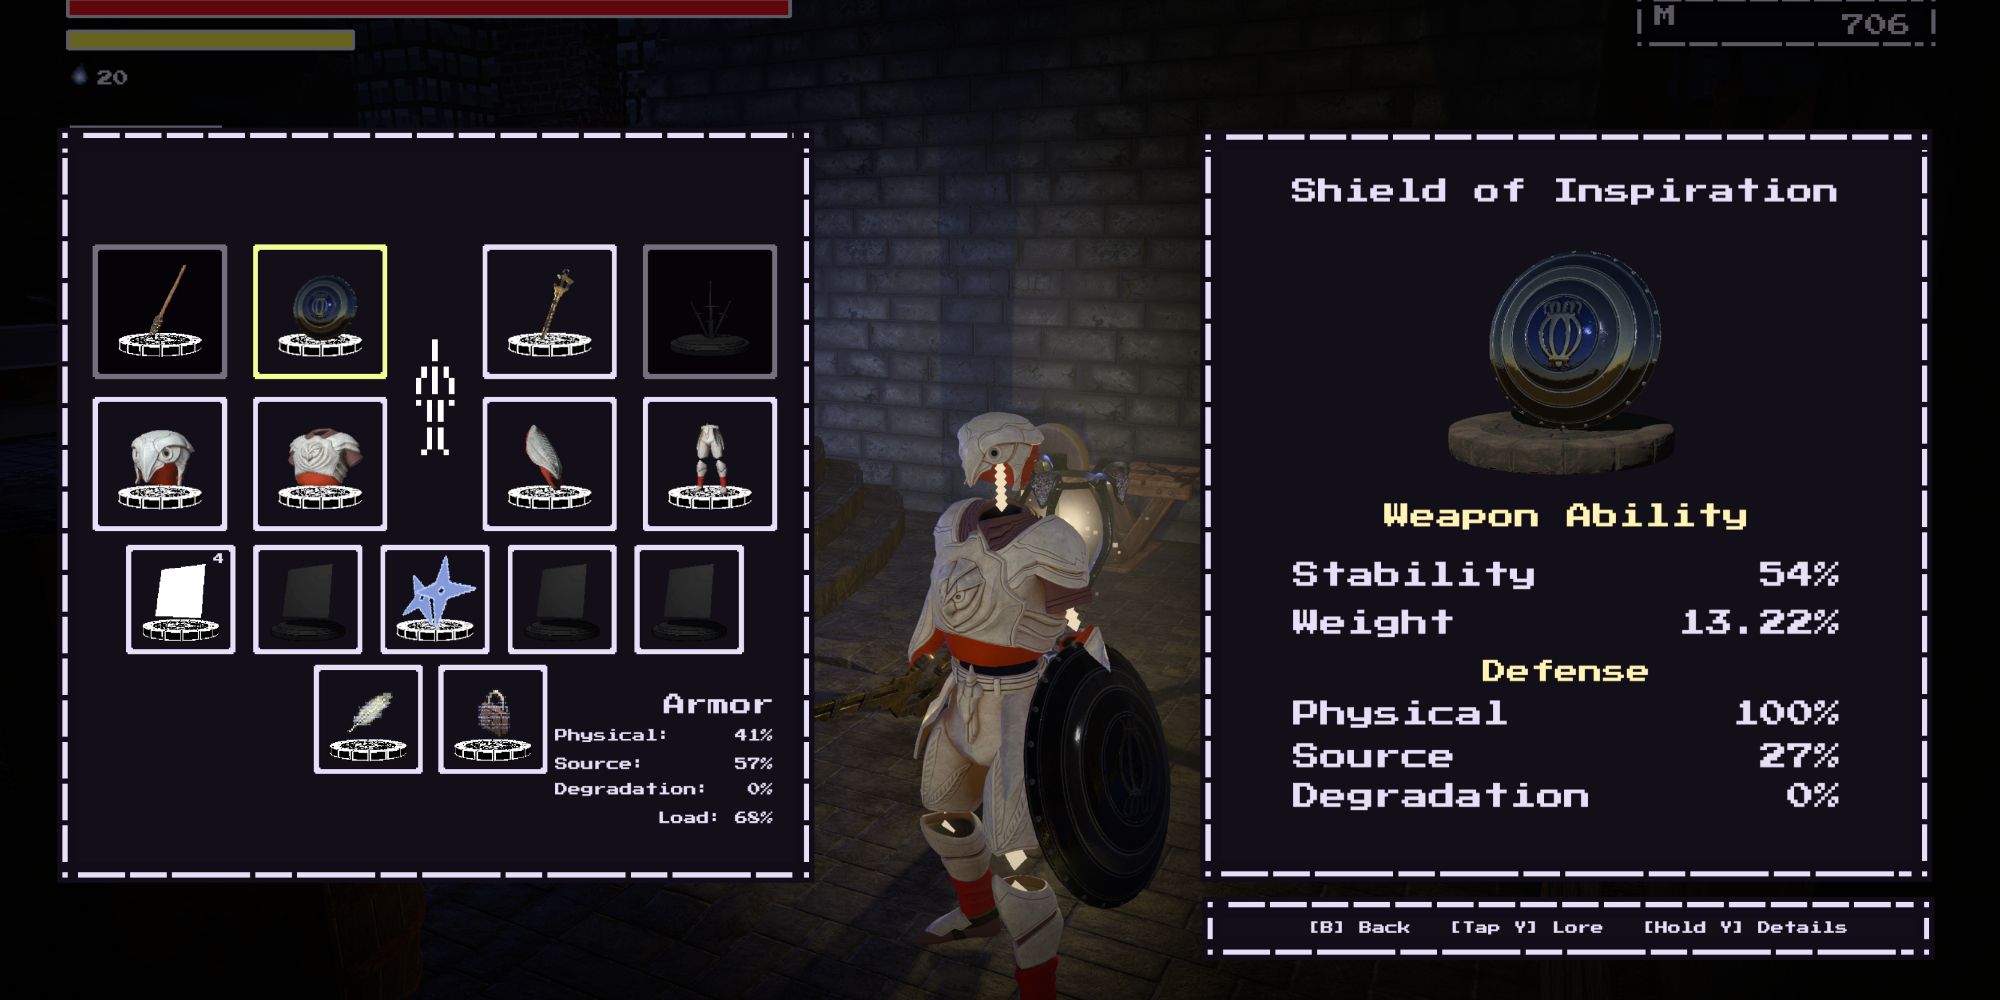 The Stats for the Shield of Inspiration in The Last Hero of Nostalgaia